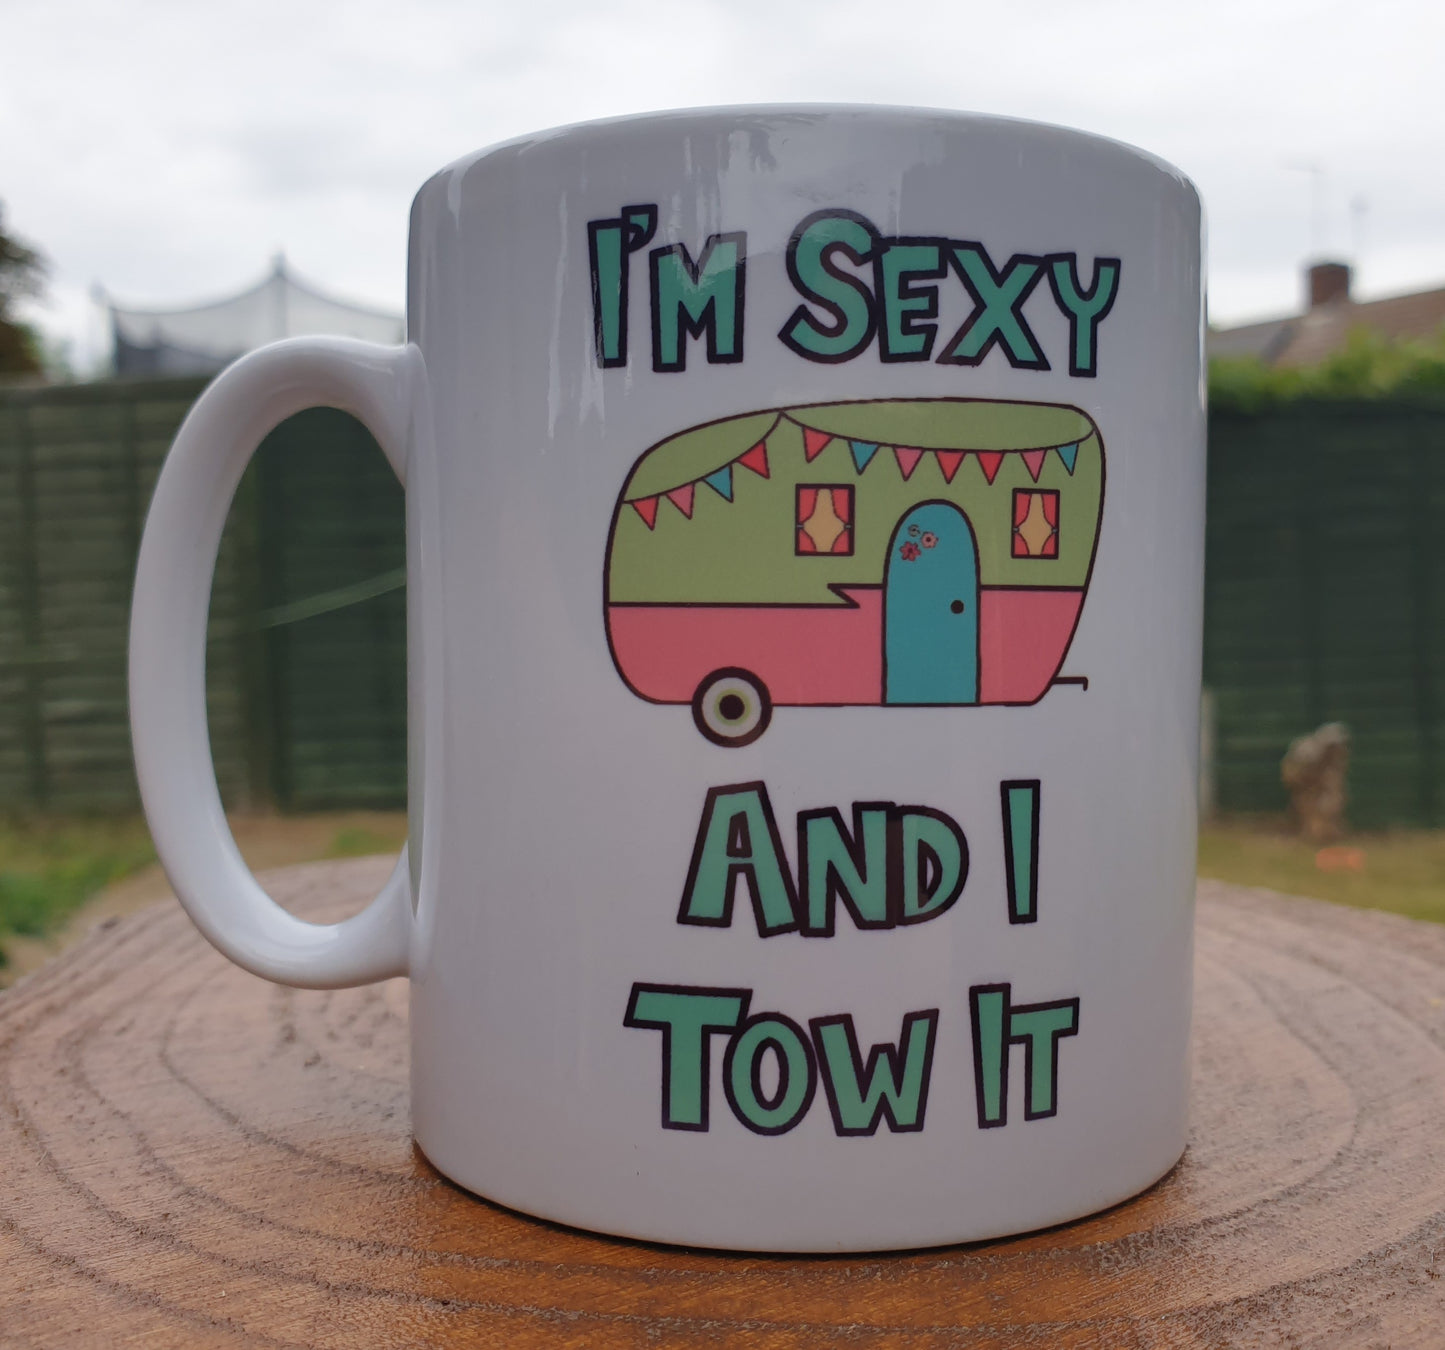 Caravan Mug Gift - I'm Sexy And I Tow It - Nice Cute Girly Novelty Funny Holiday Caravanning Travel Cup Present